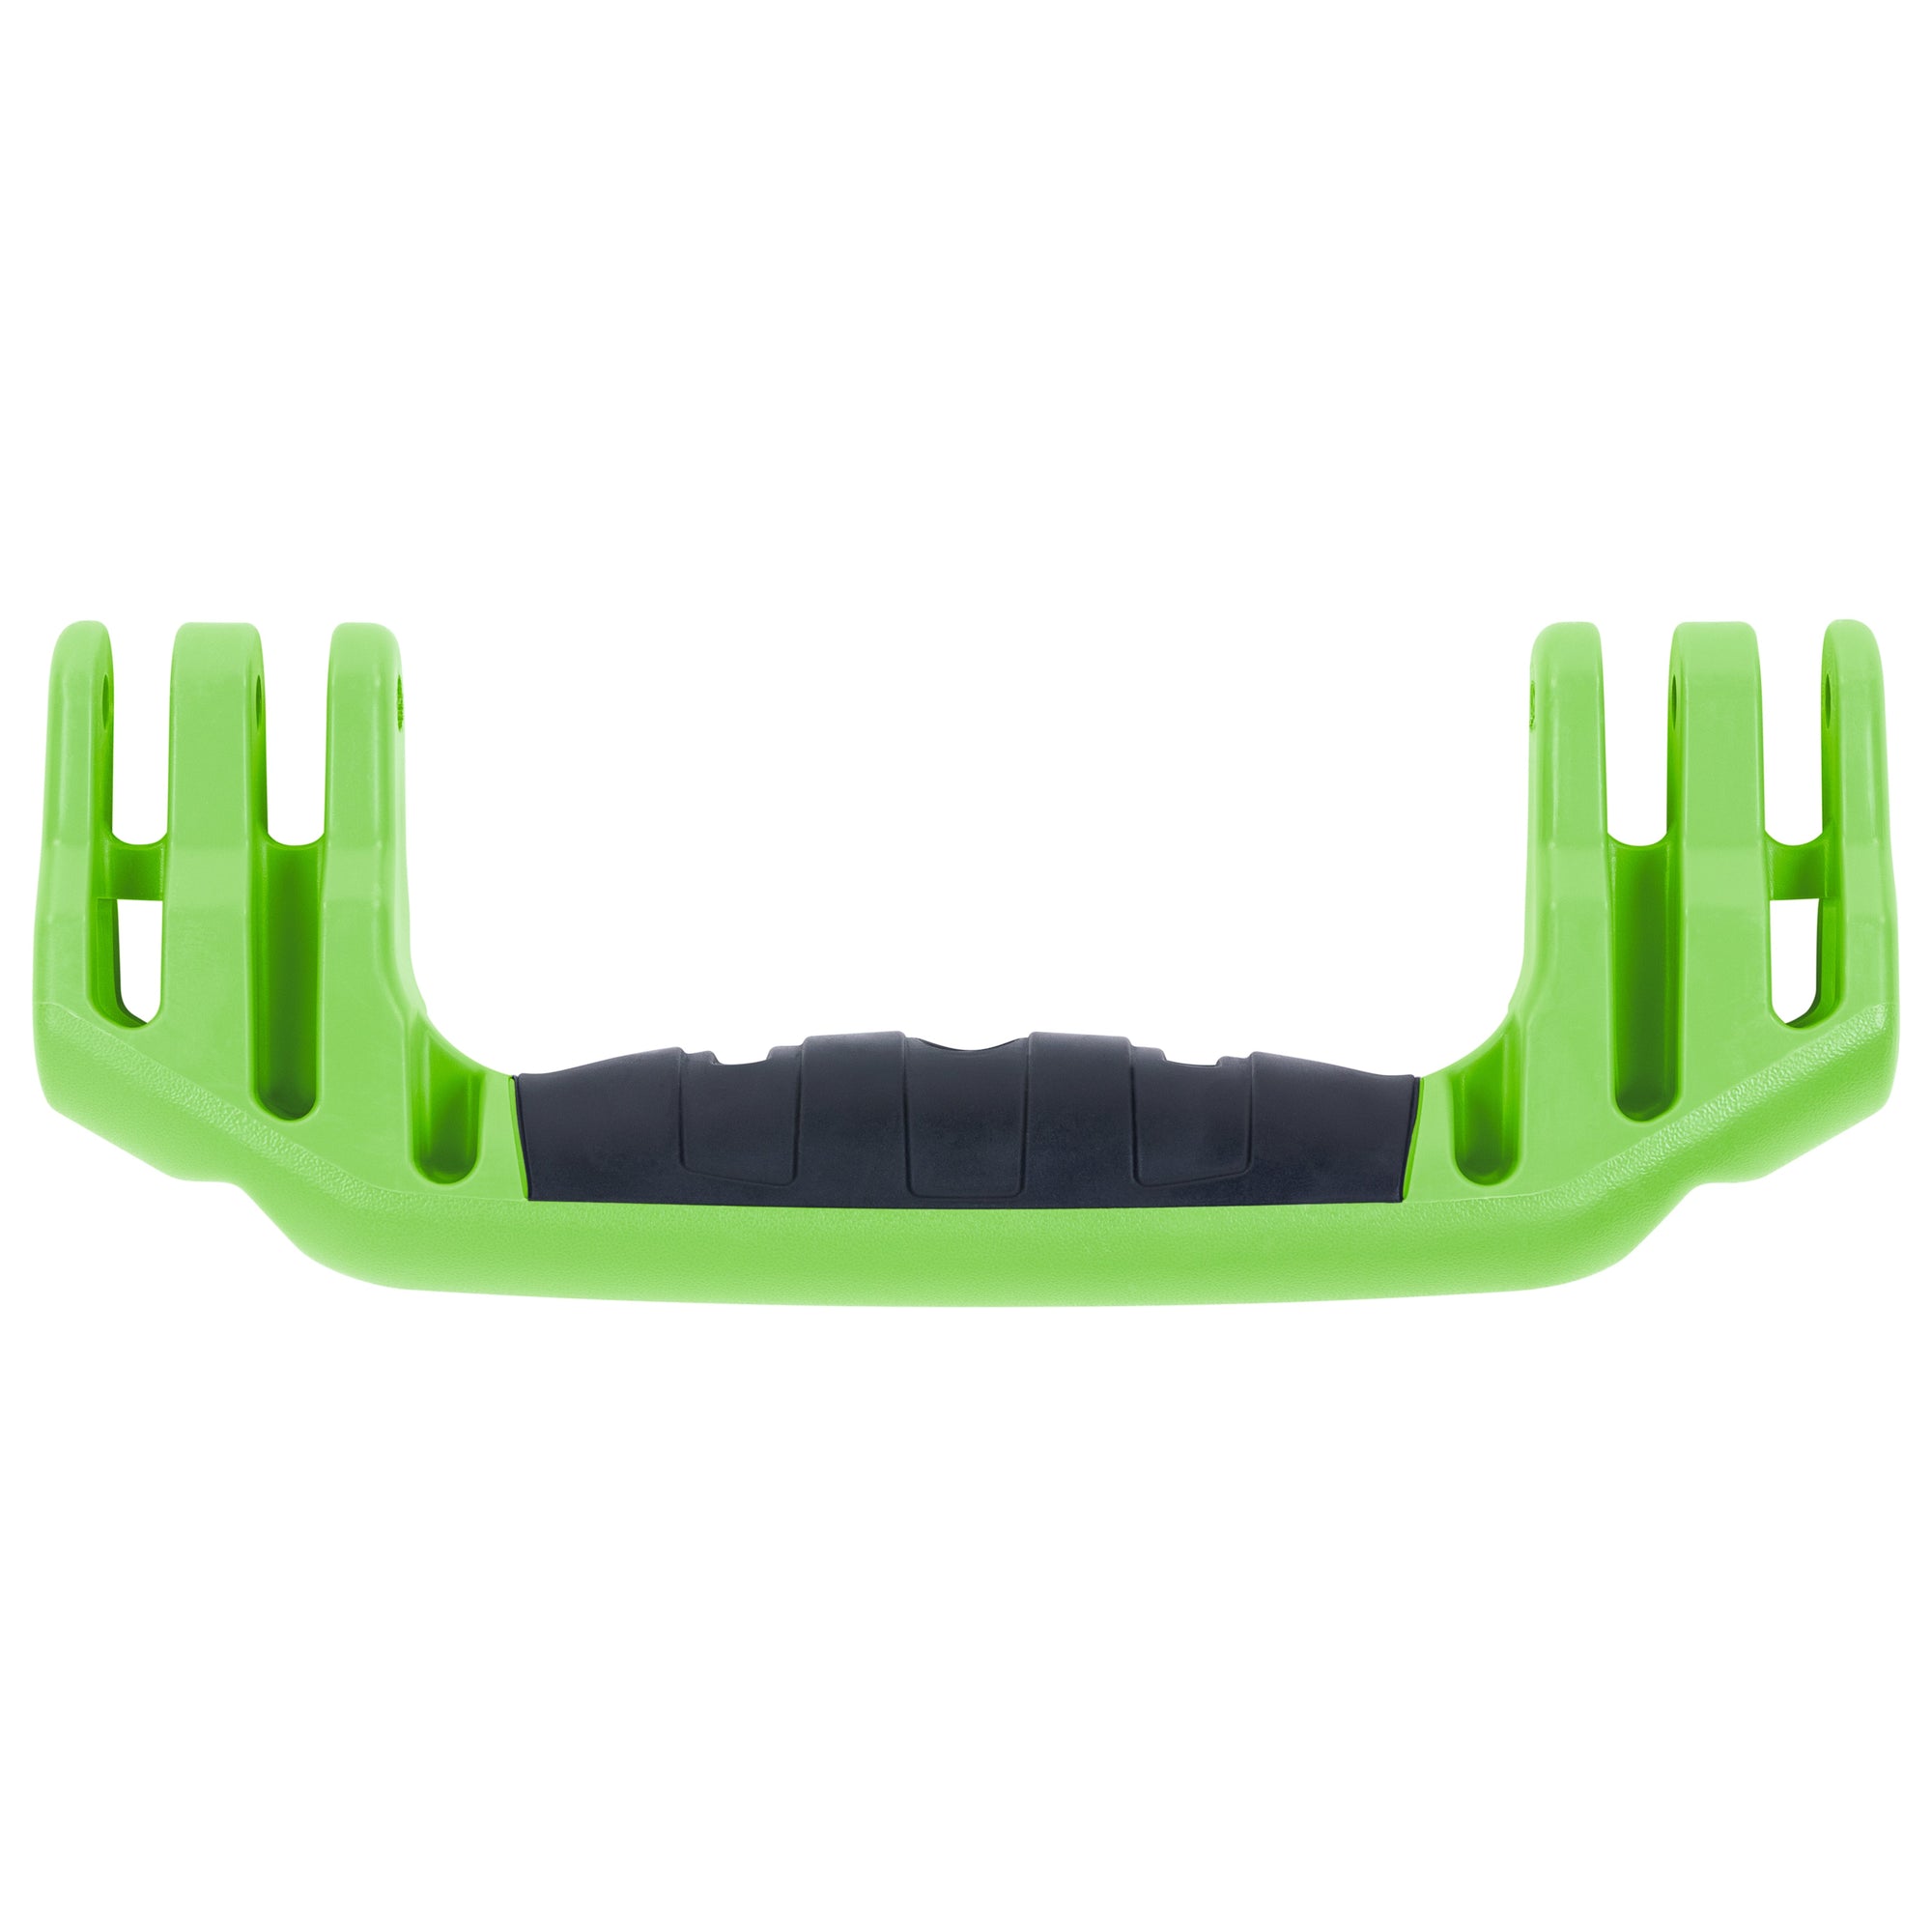 Pelican Rubber Overmolded Replacement Handle, Medium, Lime Green (3-Prong) ColorCase 